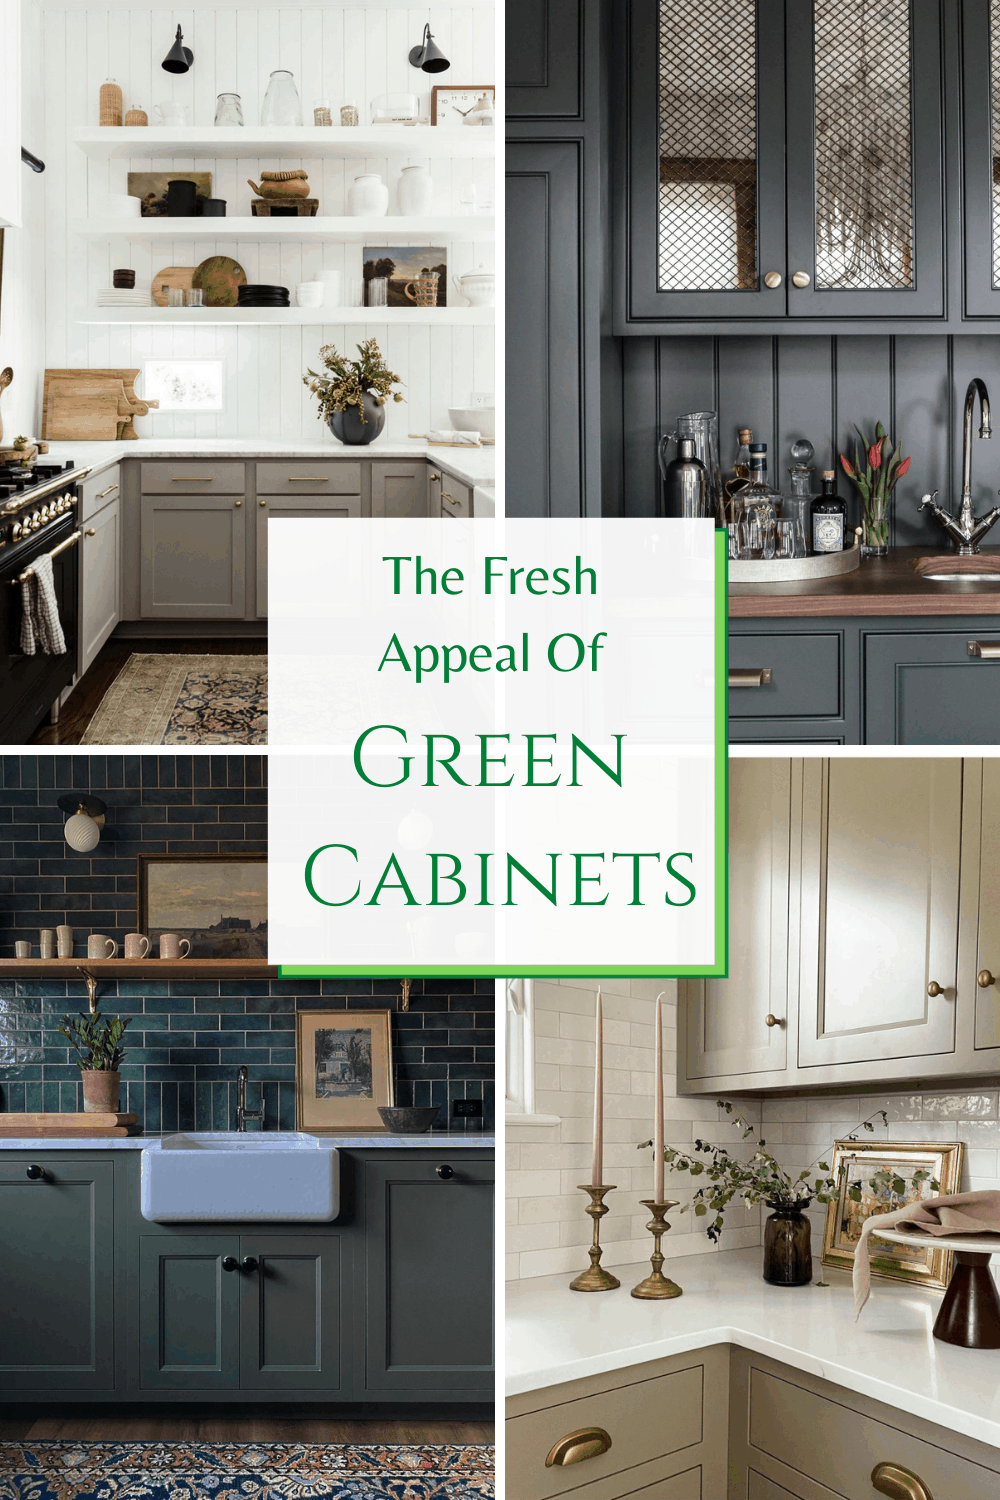 Kitchen cabinets in different shades of green